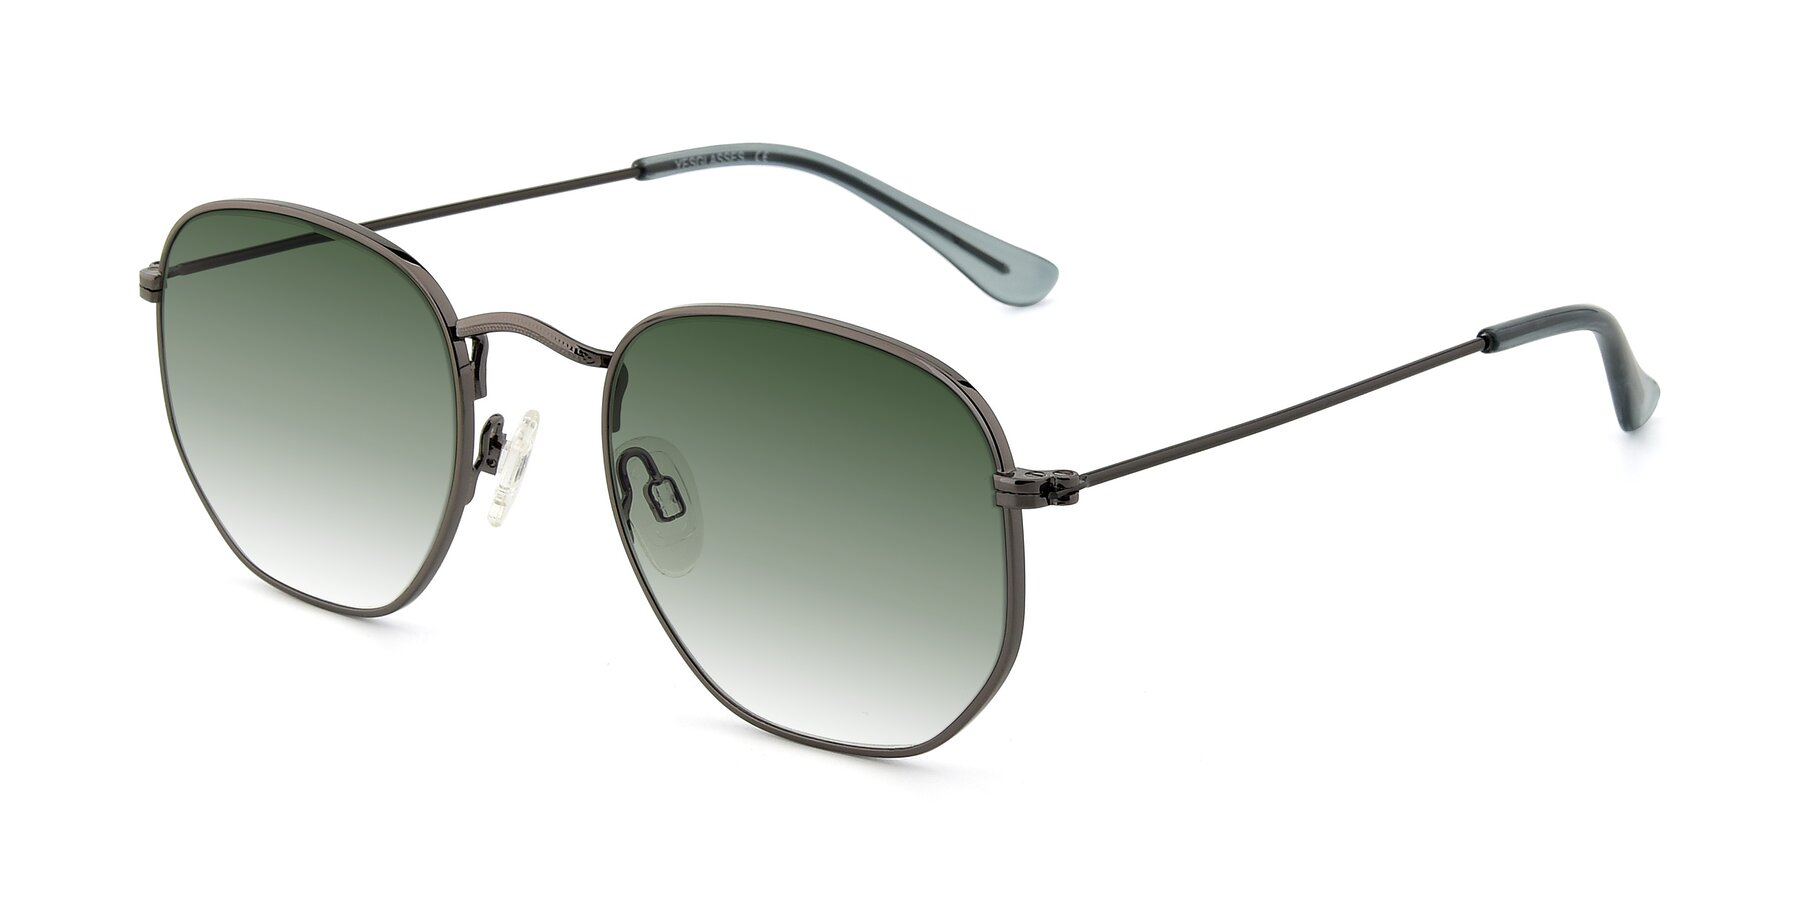 Angle of SSR1944 in Grey with Green Gradient Lenses